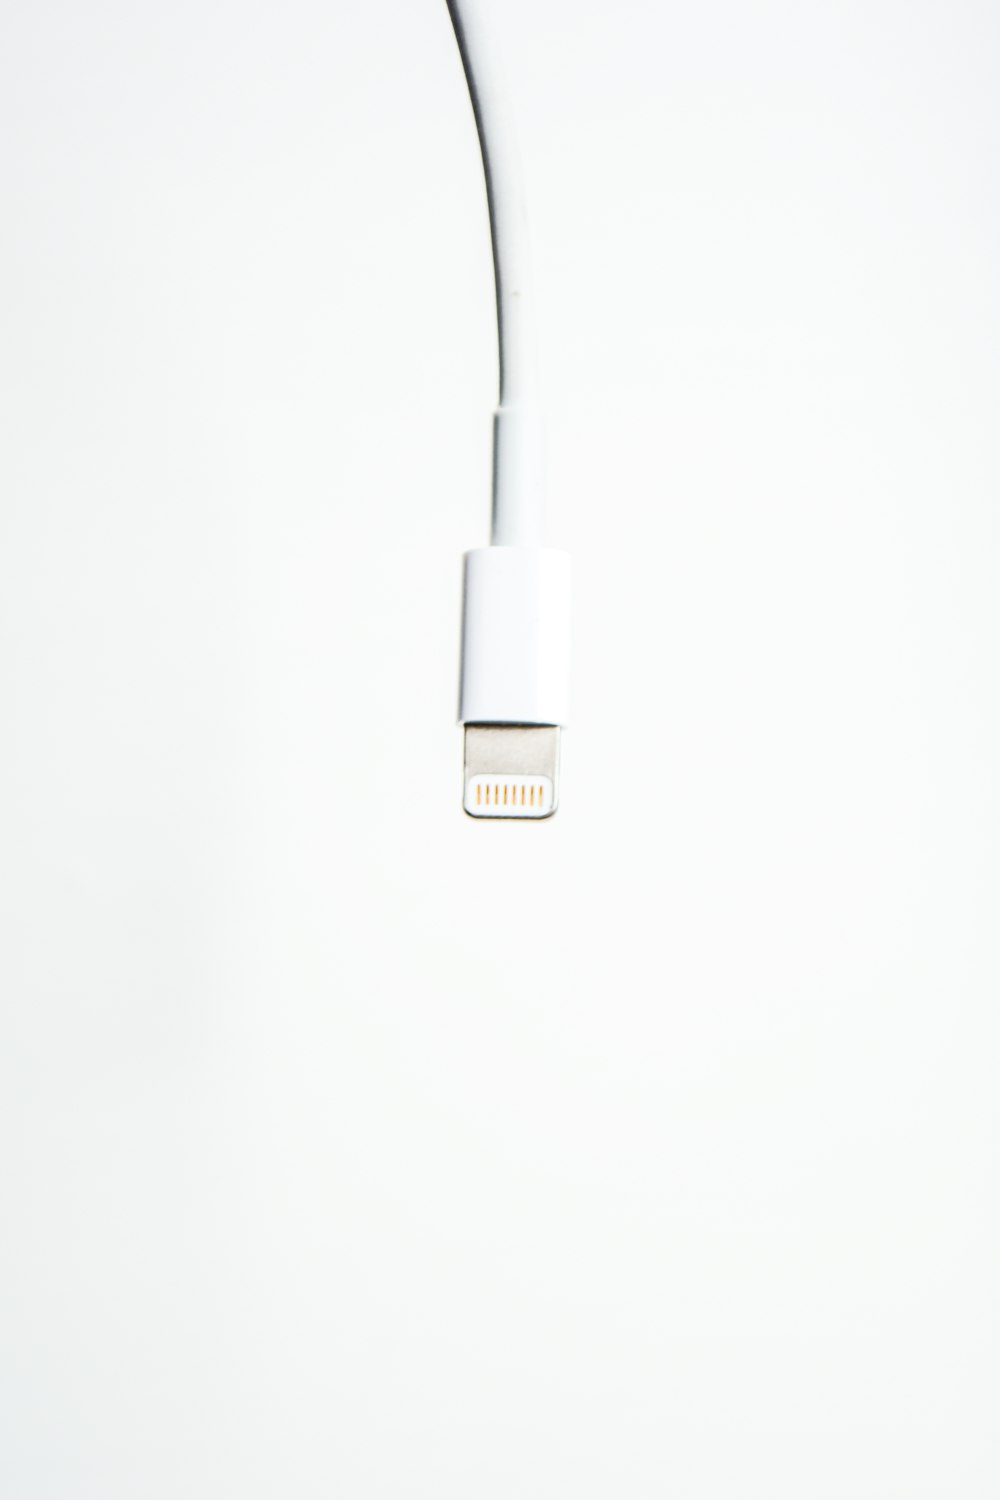 500+ Iphone Charger Pictures [HD]